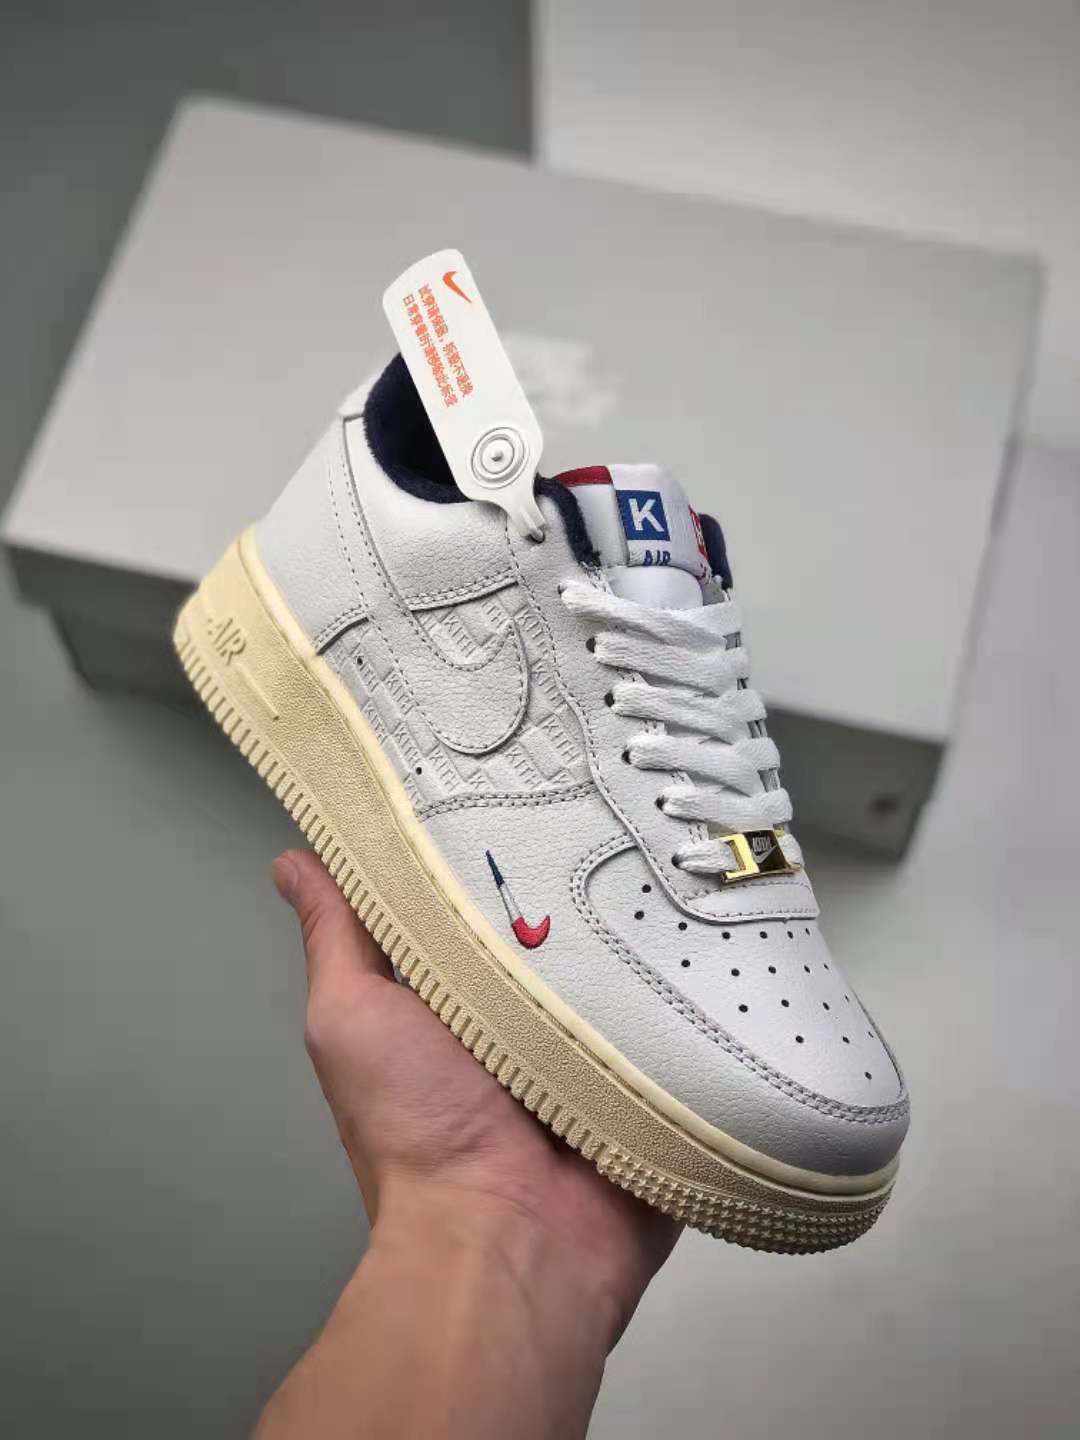 Nike Kith x Nike Air Force 1 Low 'France' CZ7927-100 - Exclusive Collaboration for Sneaker Enthusiasts